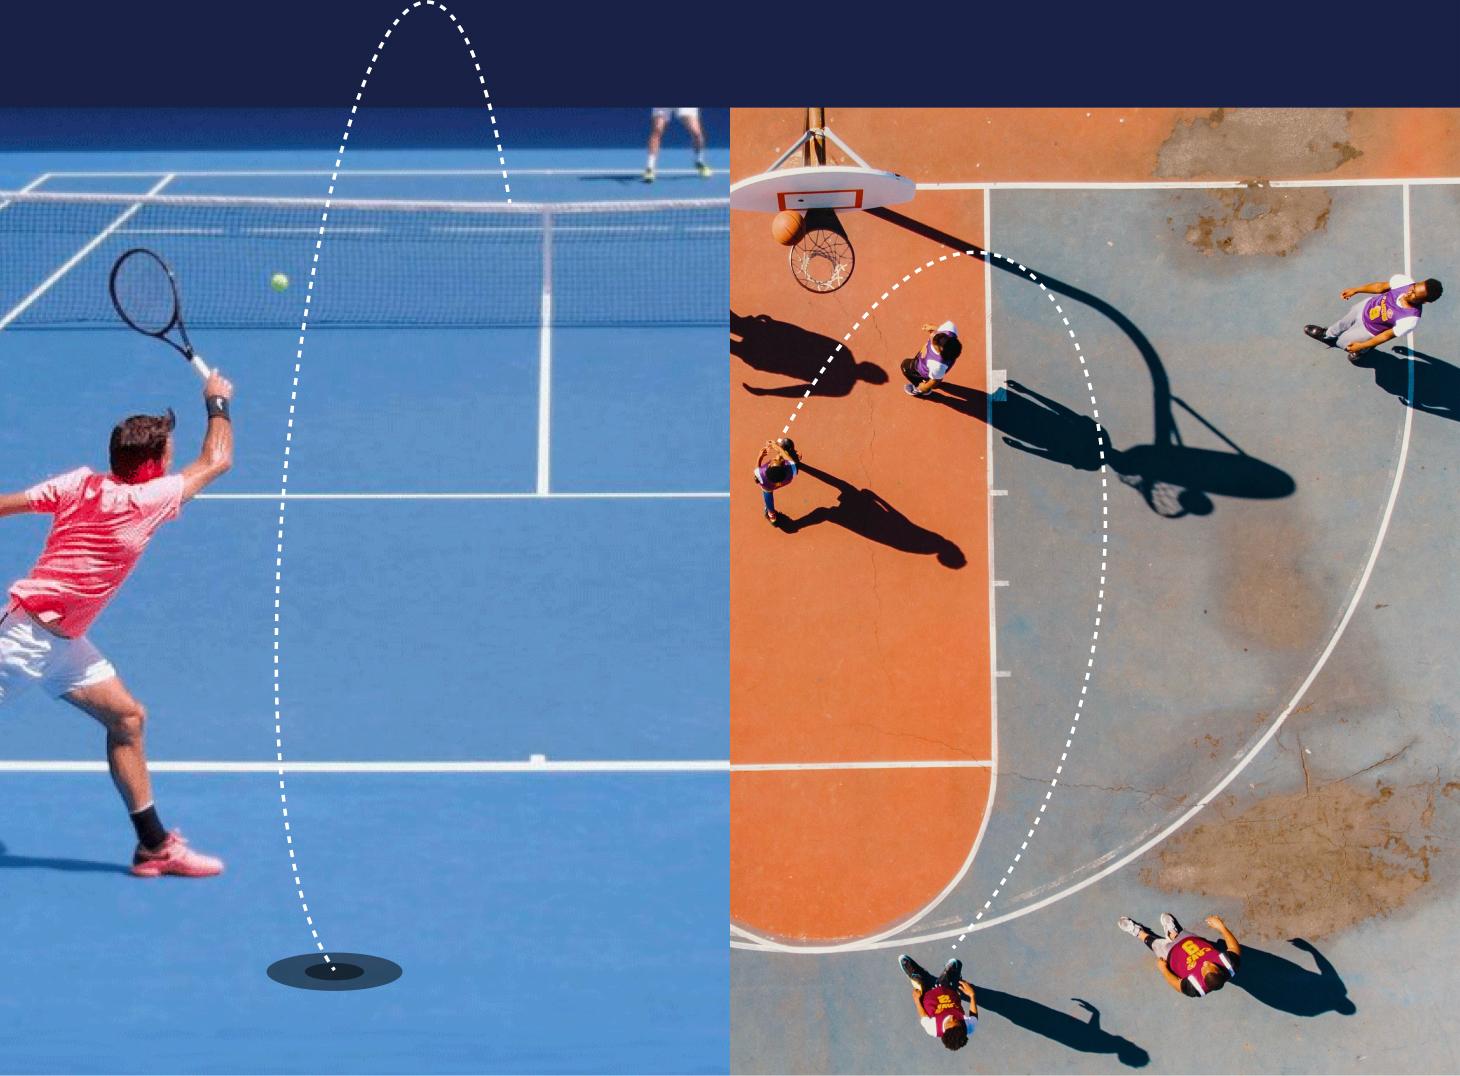 Side-by-side image of people playing tennis and basketball with lines showing the trajectory of the ball as it is moving through the air.